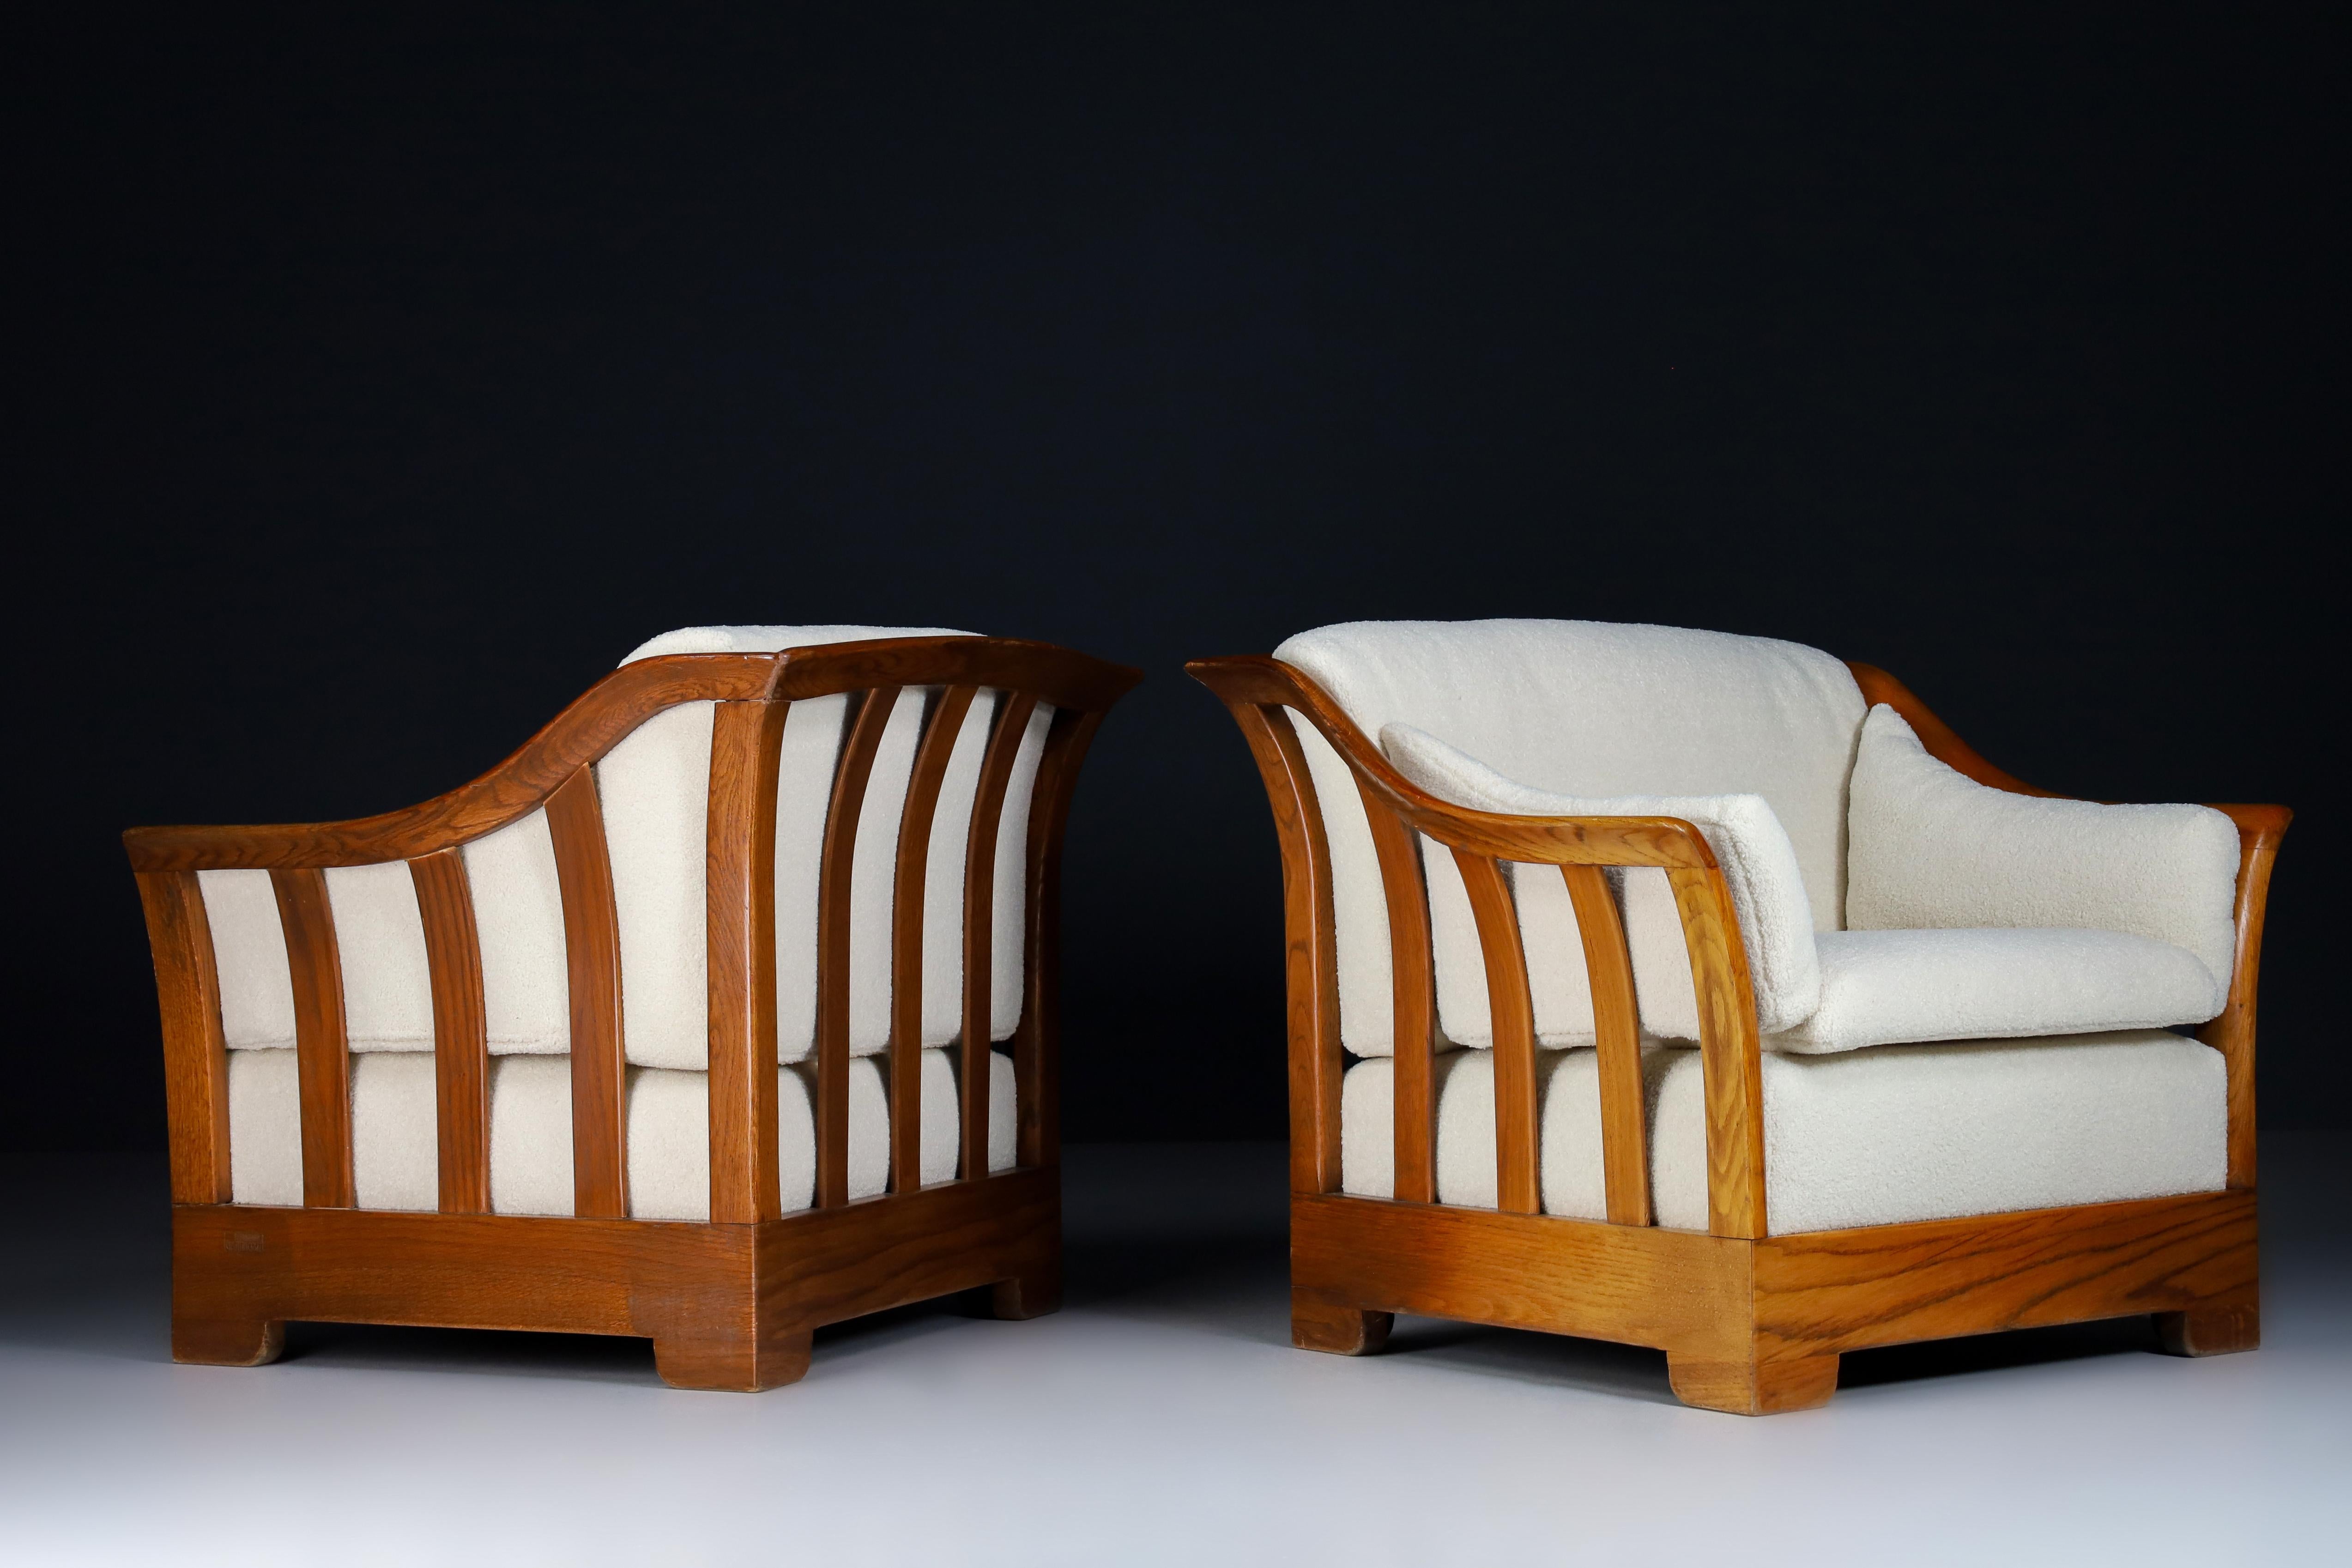 Lounge chairs in Ash and Teddy upholstery by Sapporo for Mobil Girgi, Italy 1970

Lounge chairs in Ash and Teddy upholstery by Sapporo for Mobil Girgi, Italy 1970. Generously proportioned ash wood lounge chairs; the patina of the wood is warm and